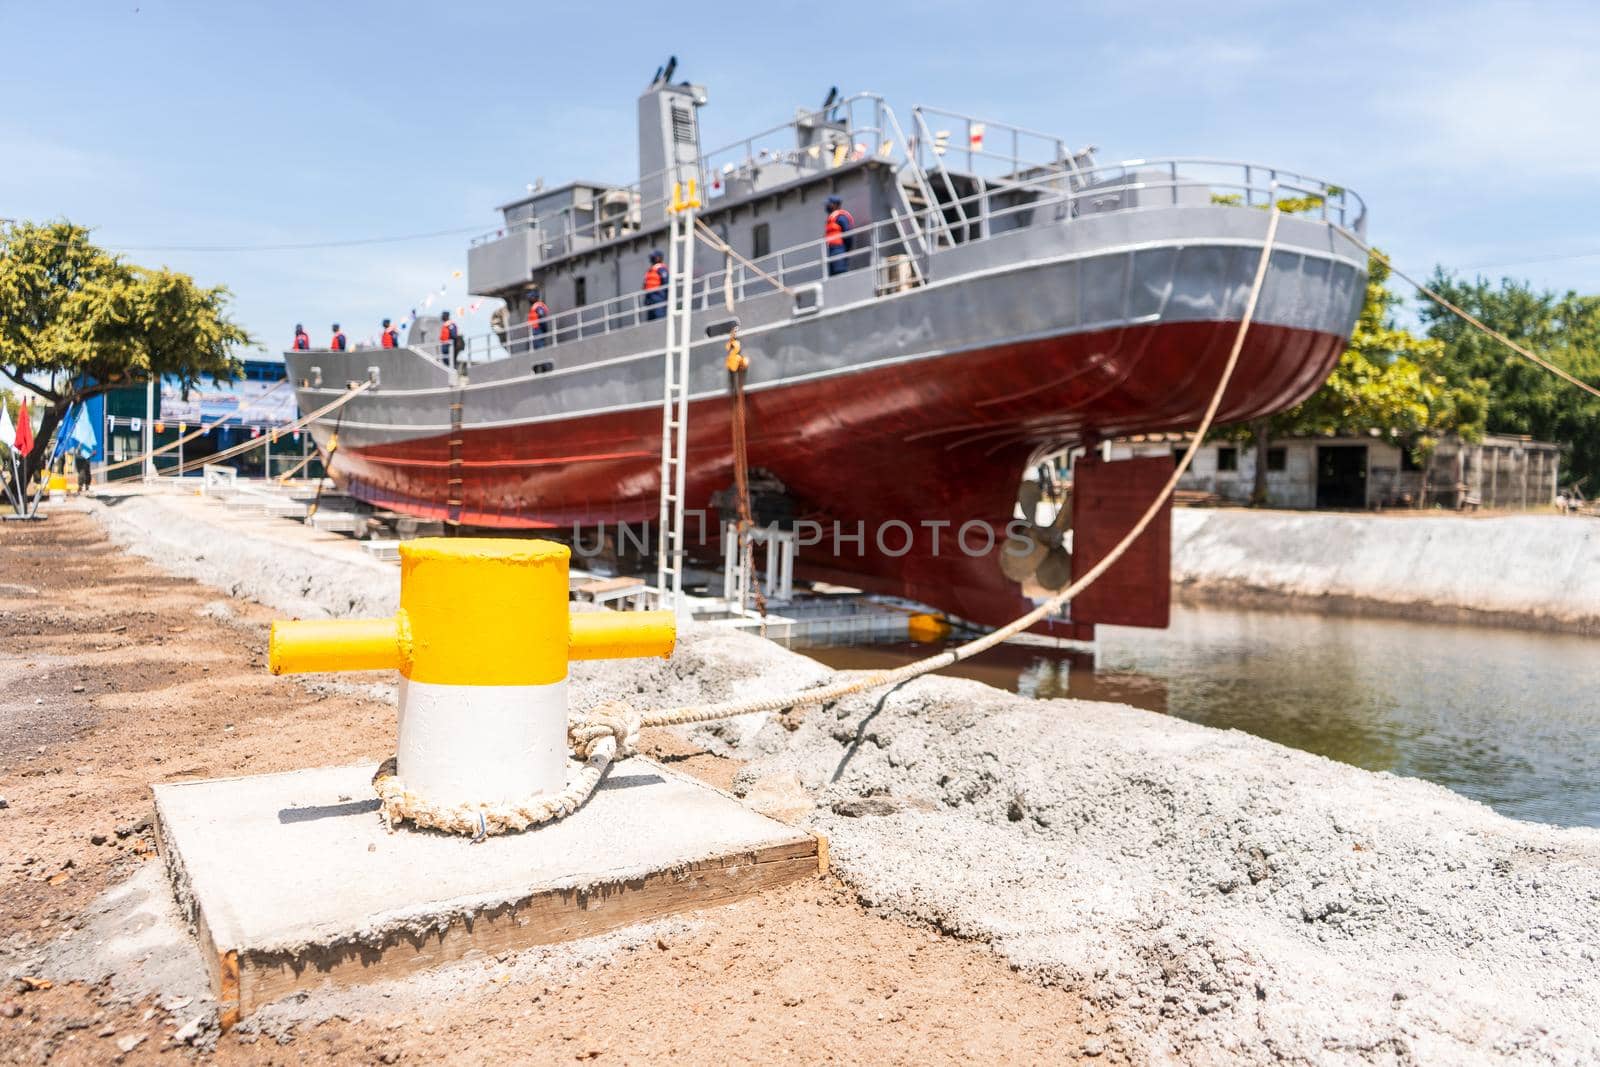 Coastguard in a dry dock waiting to receive repair and maintenance work by cfalvarez